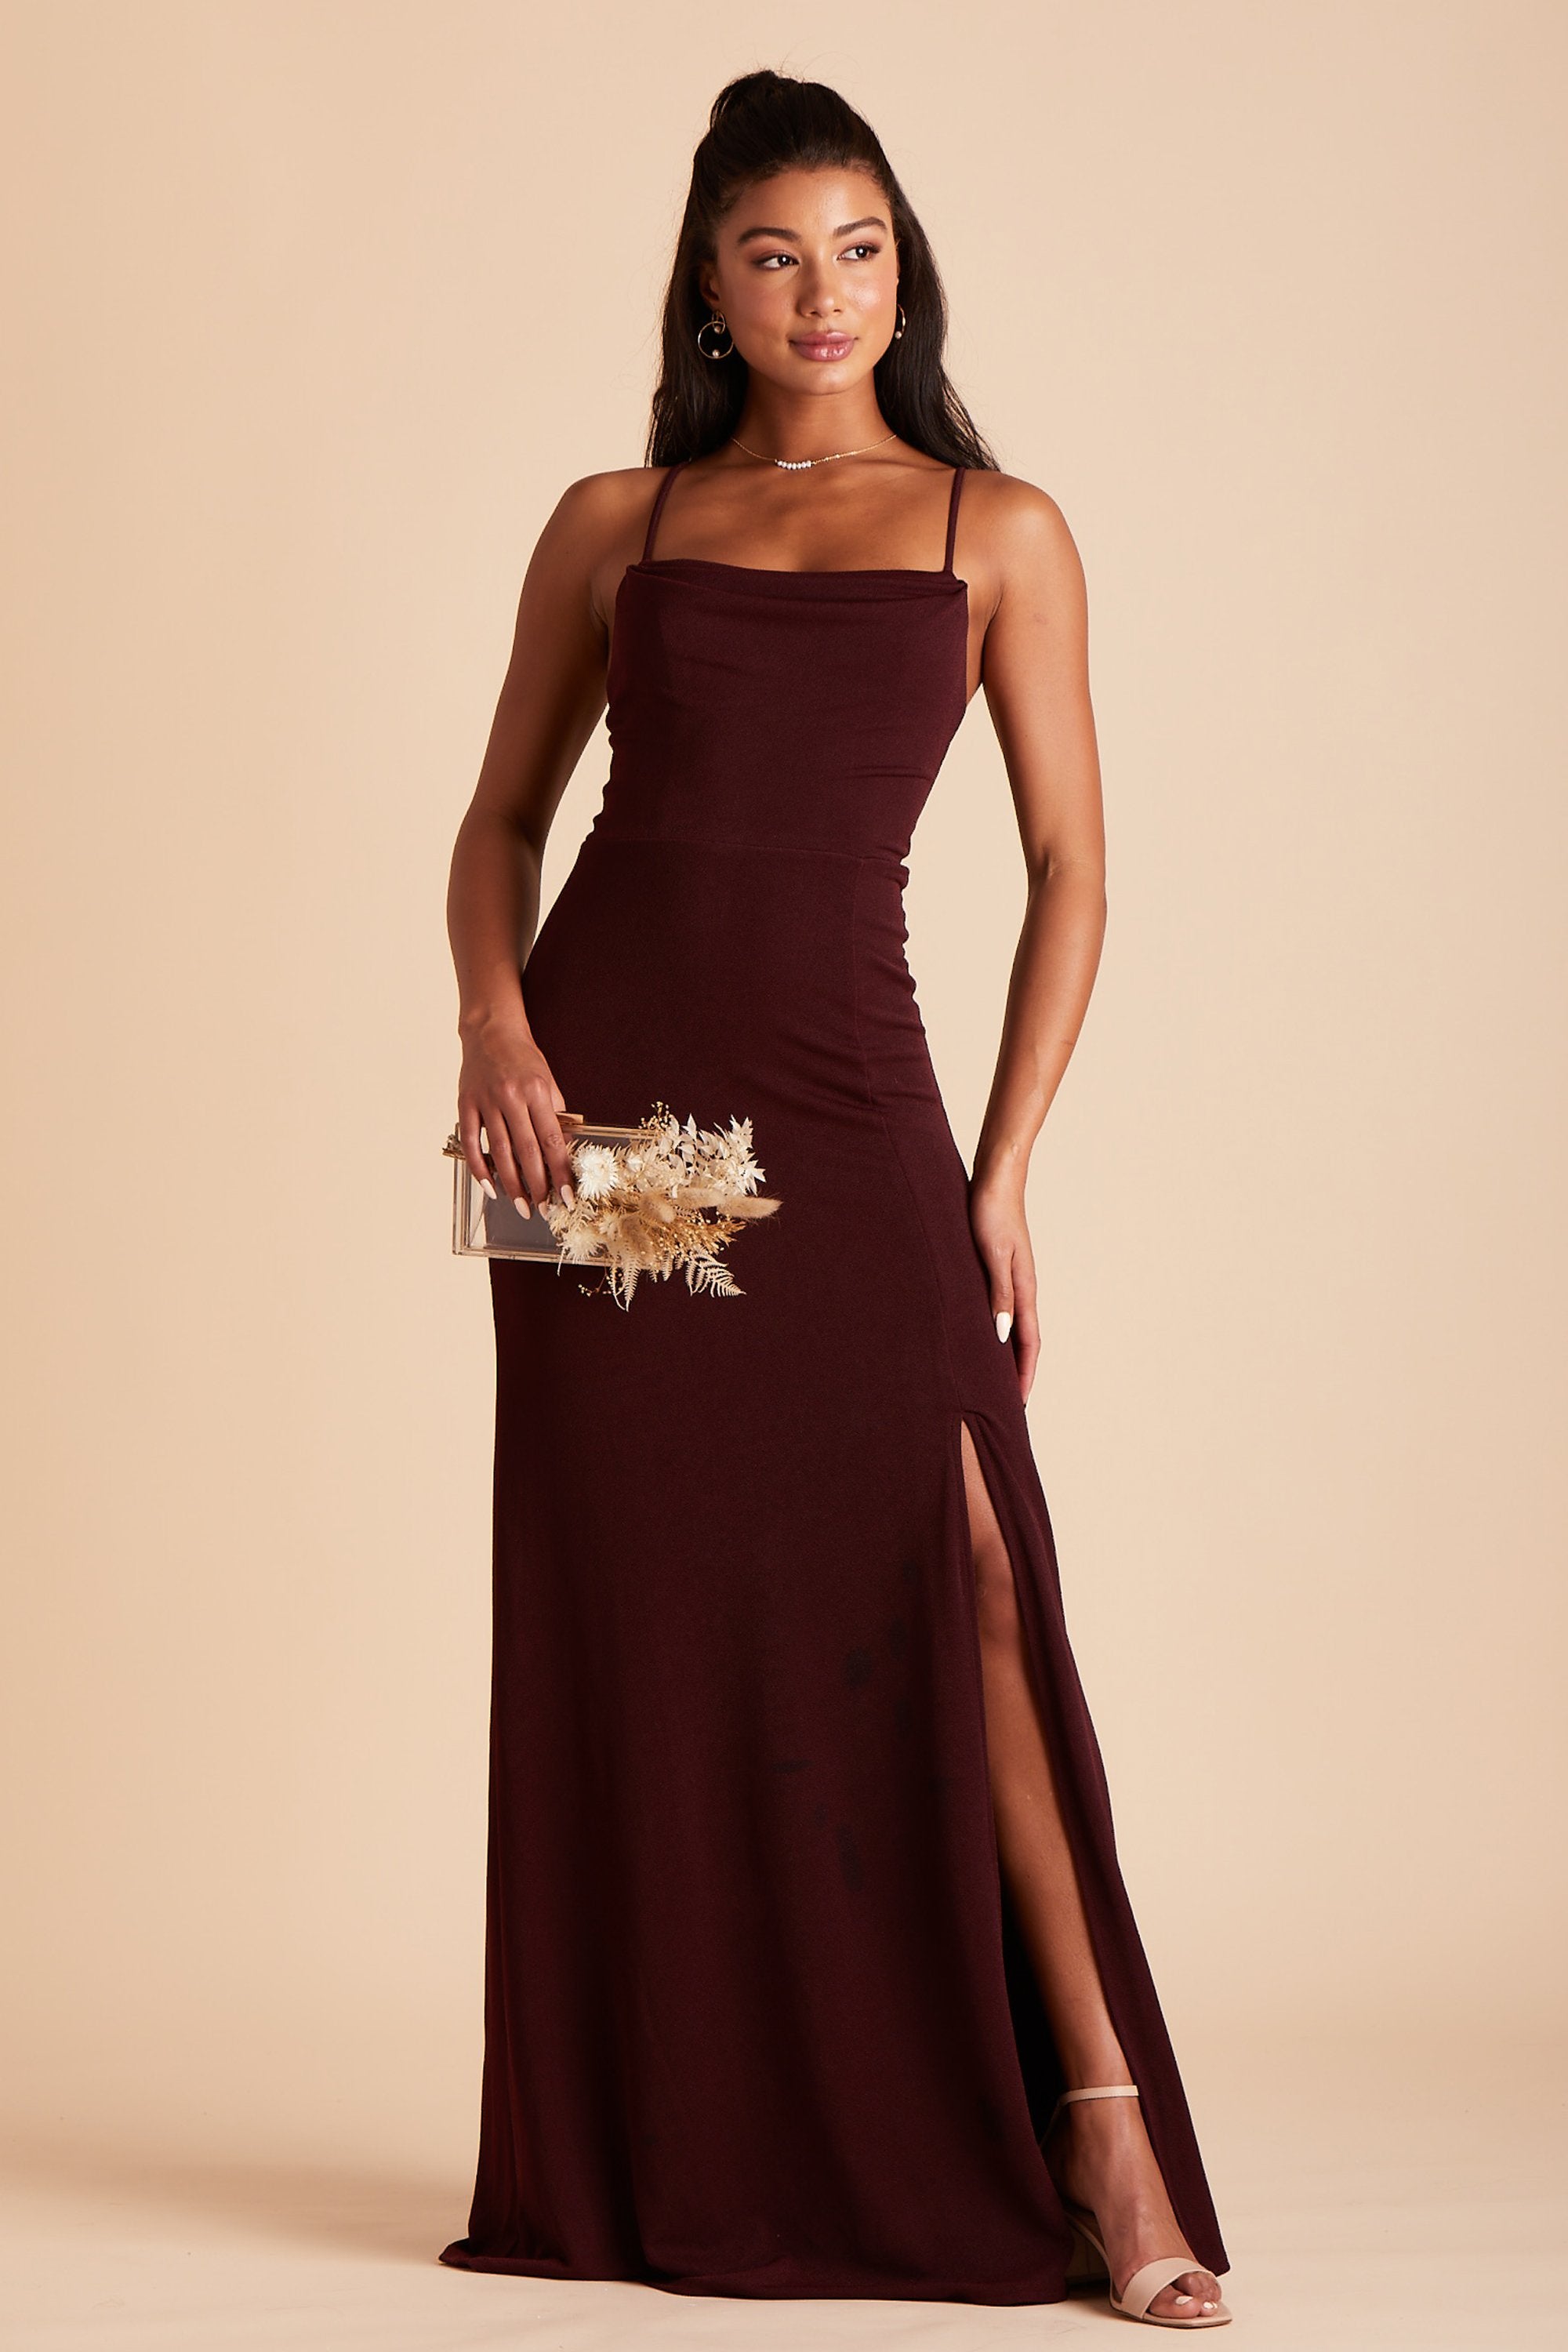 Ash bridesmaid dress with slit in cabernet burgundy crepe by Birdy Grey, front view